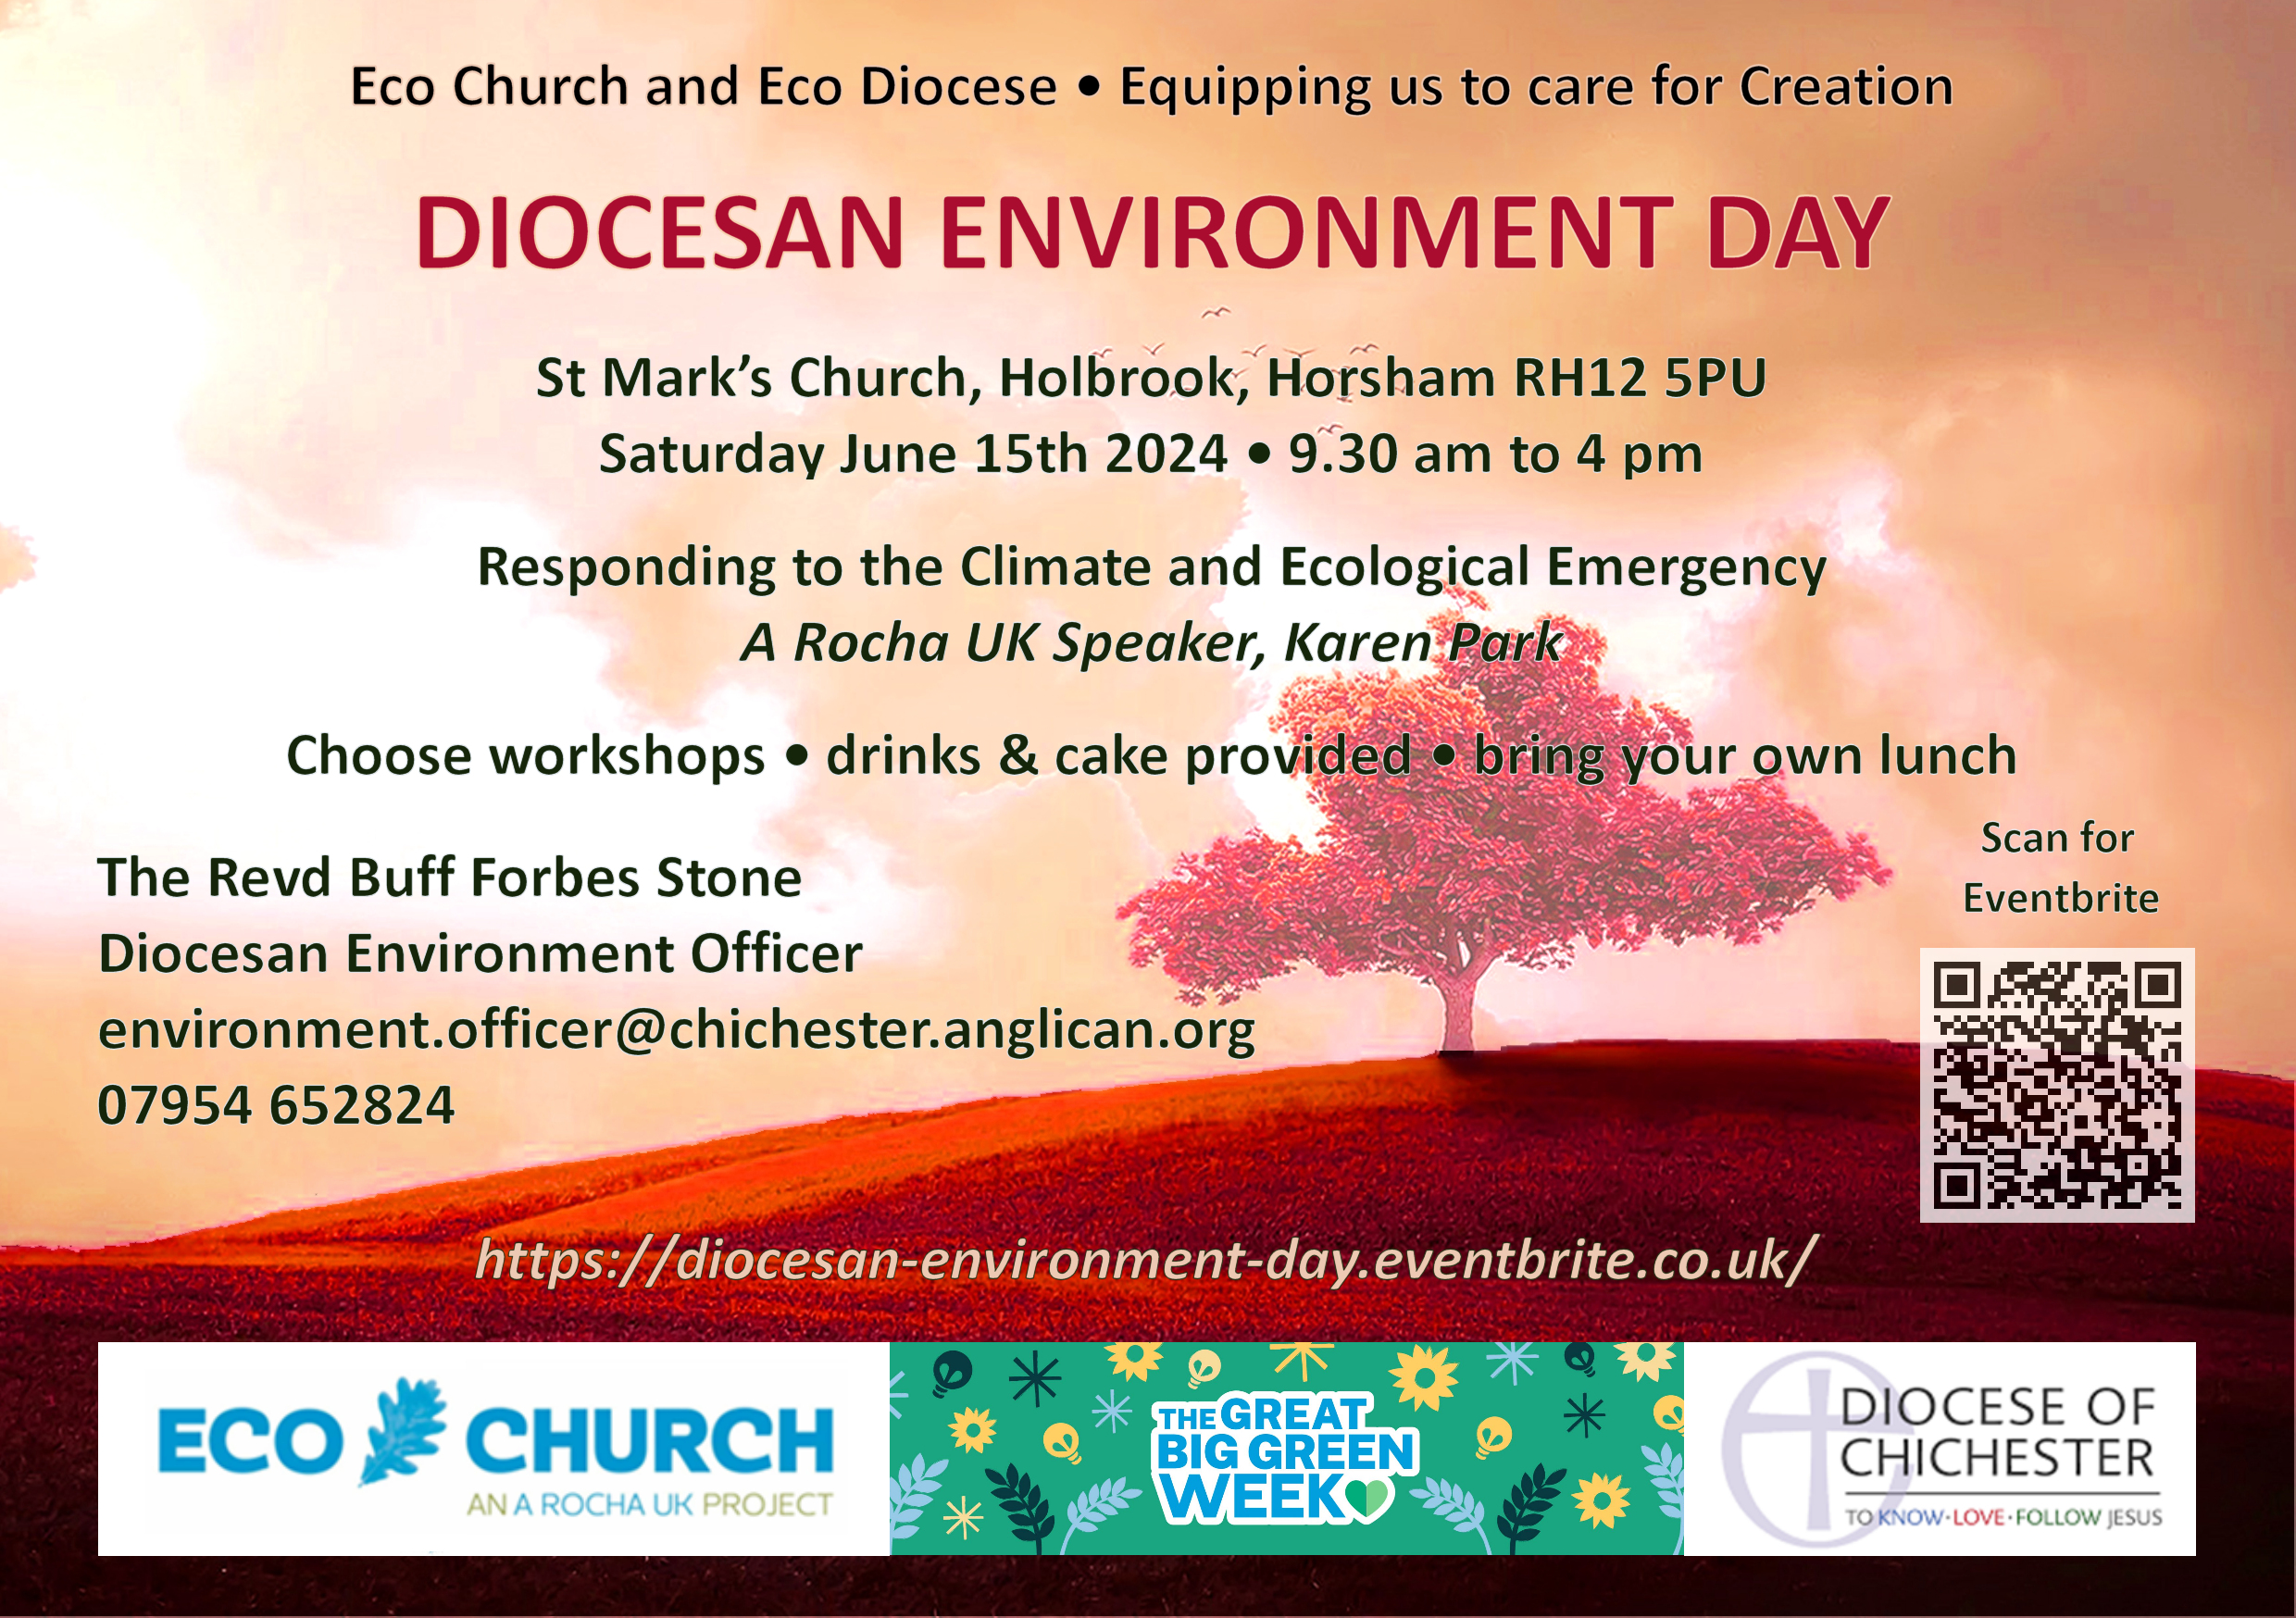 Diocesan Environment Day